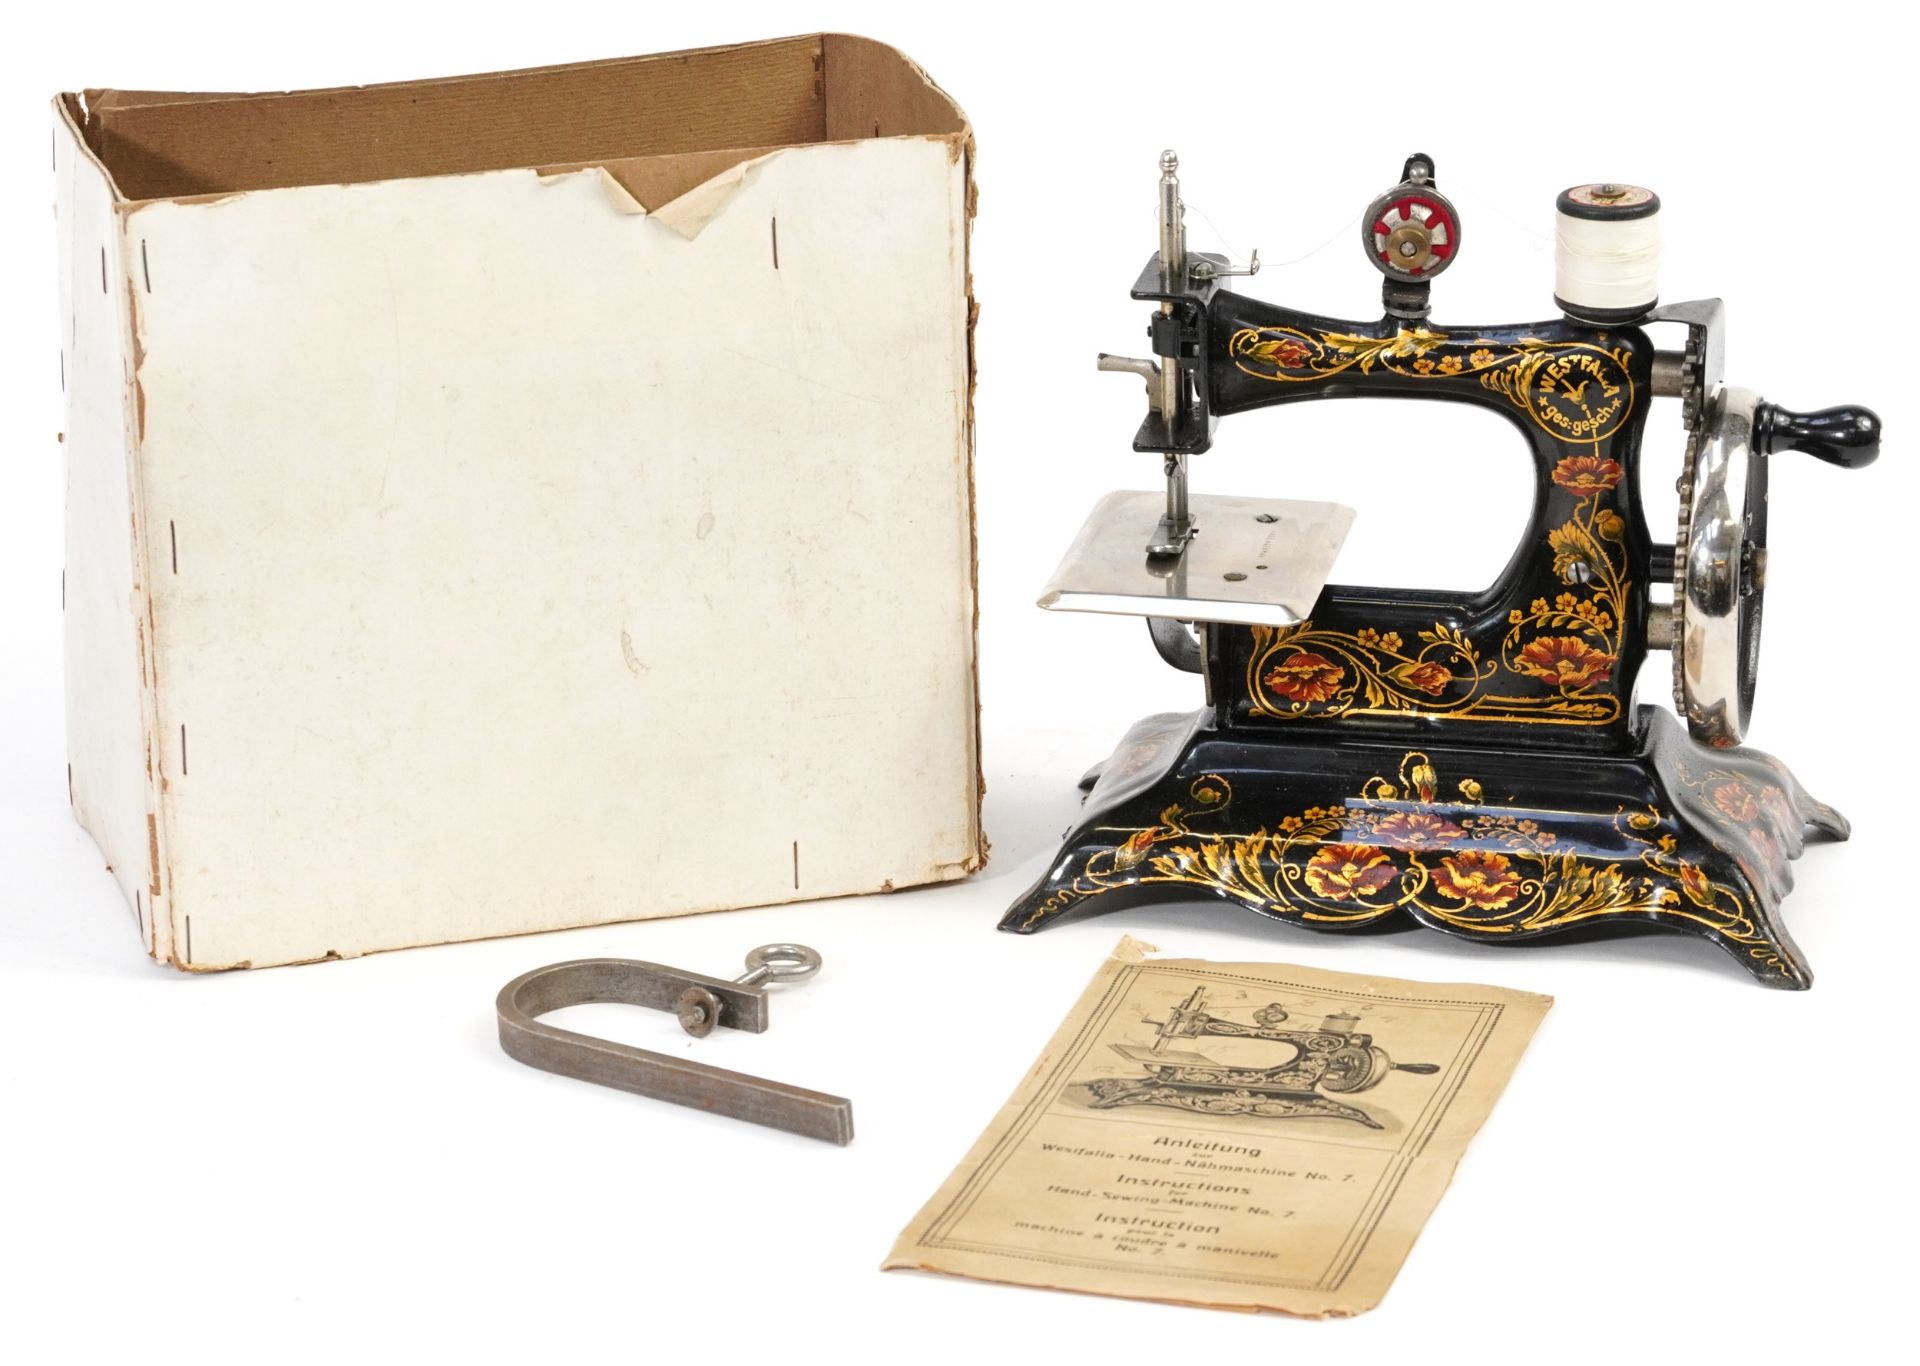 19th century German Westfalia hand operated child's sewing machine, no 7 with box and - Image 2 of 7